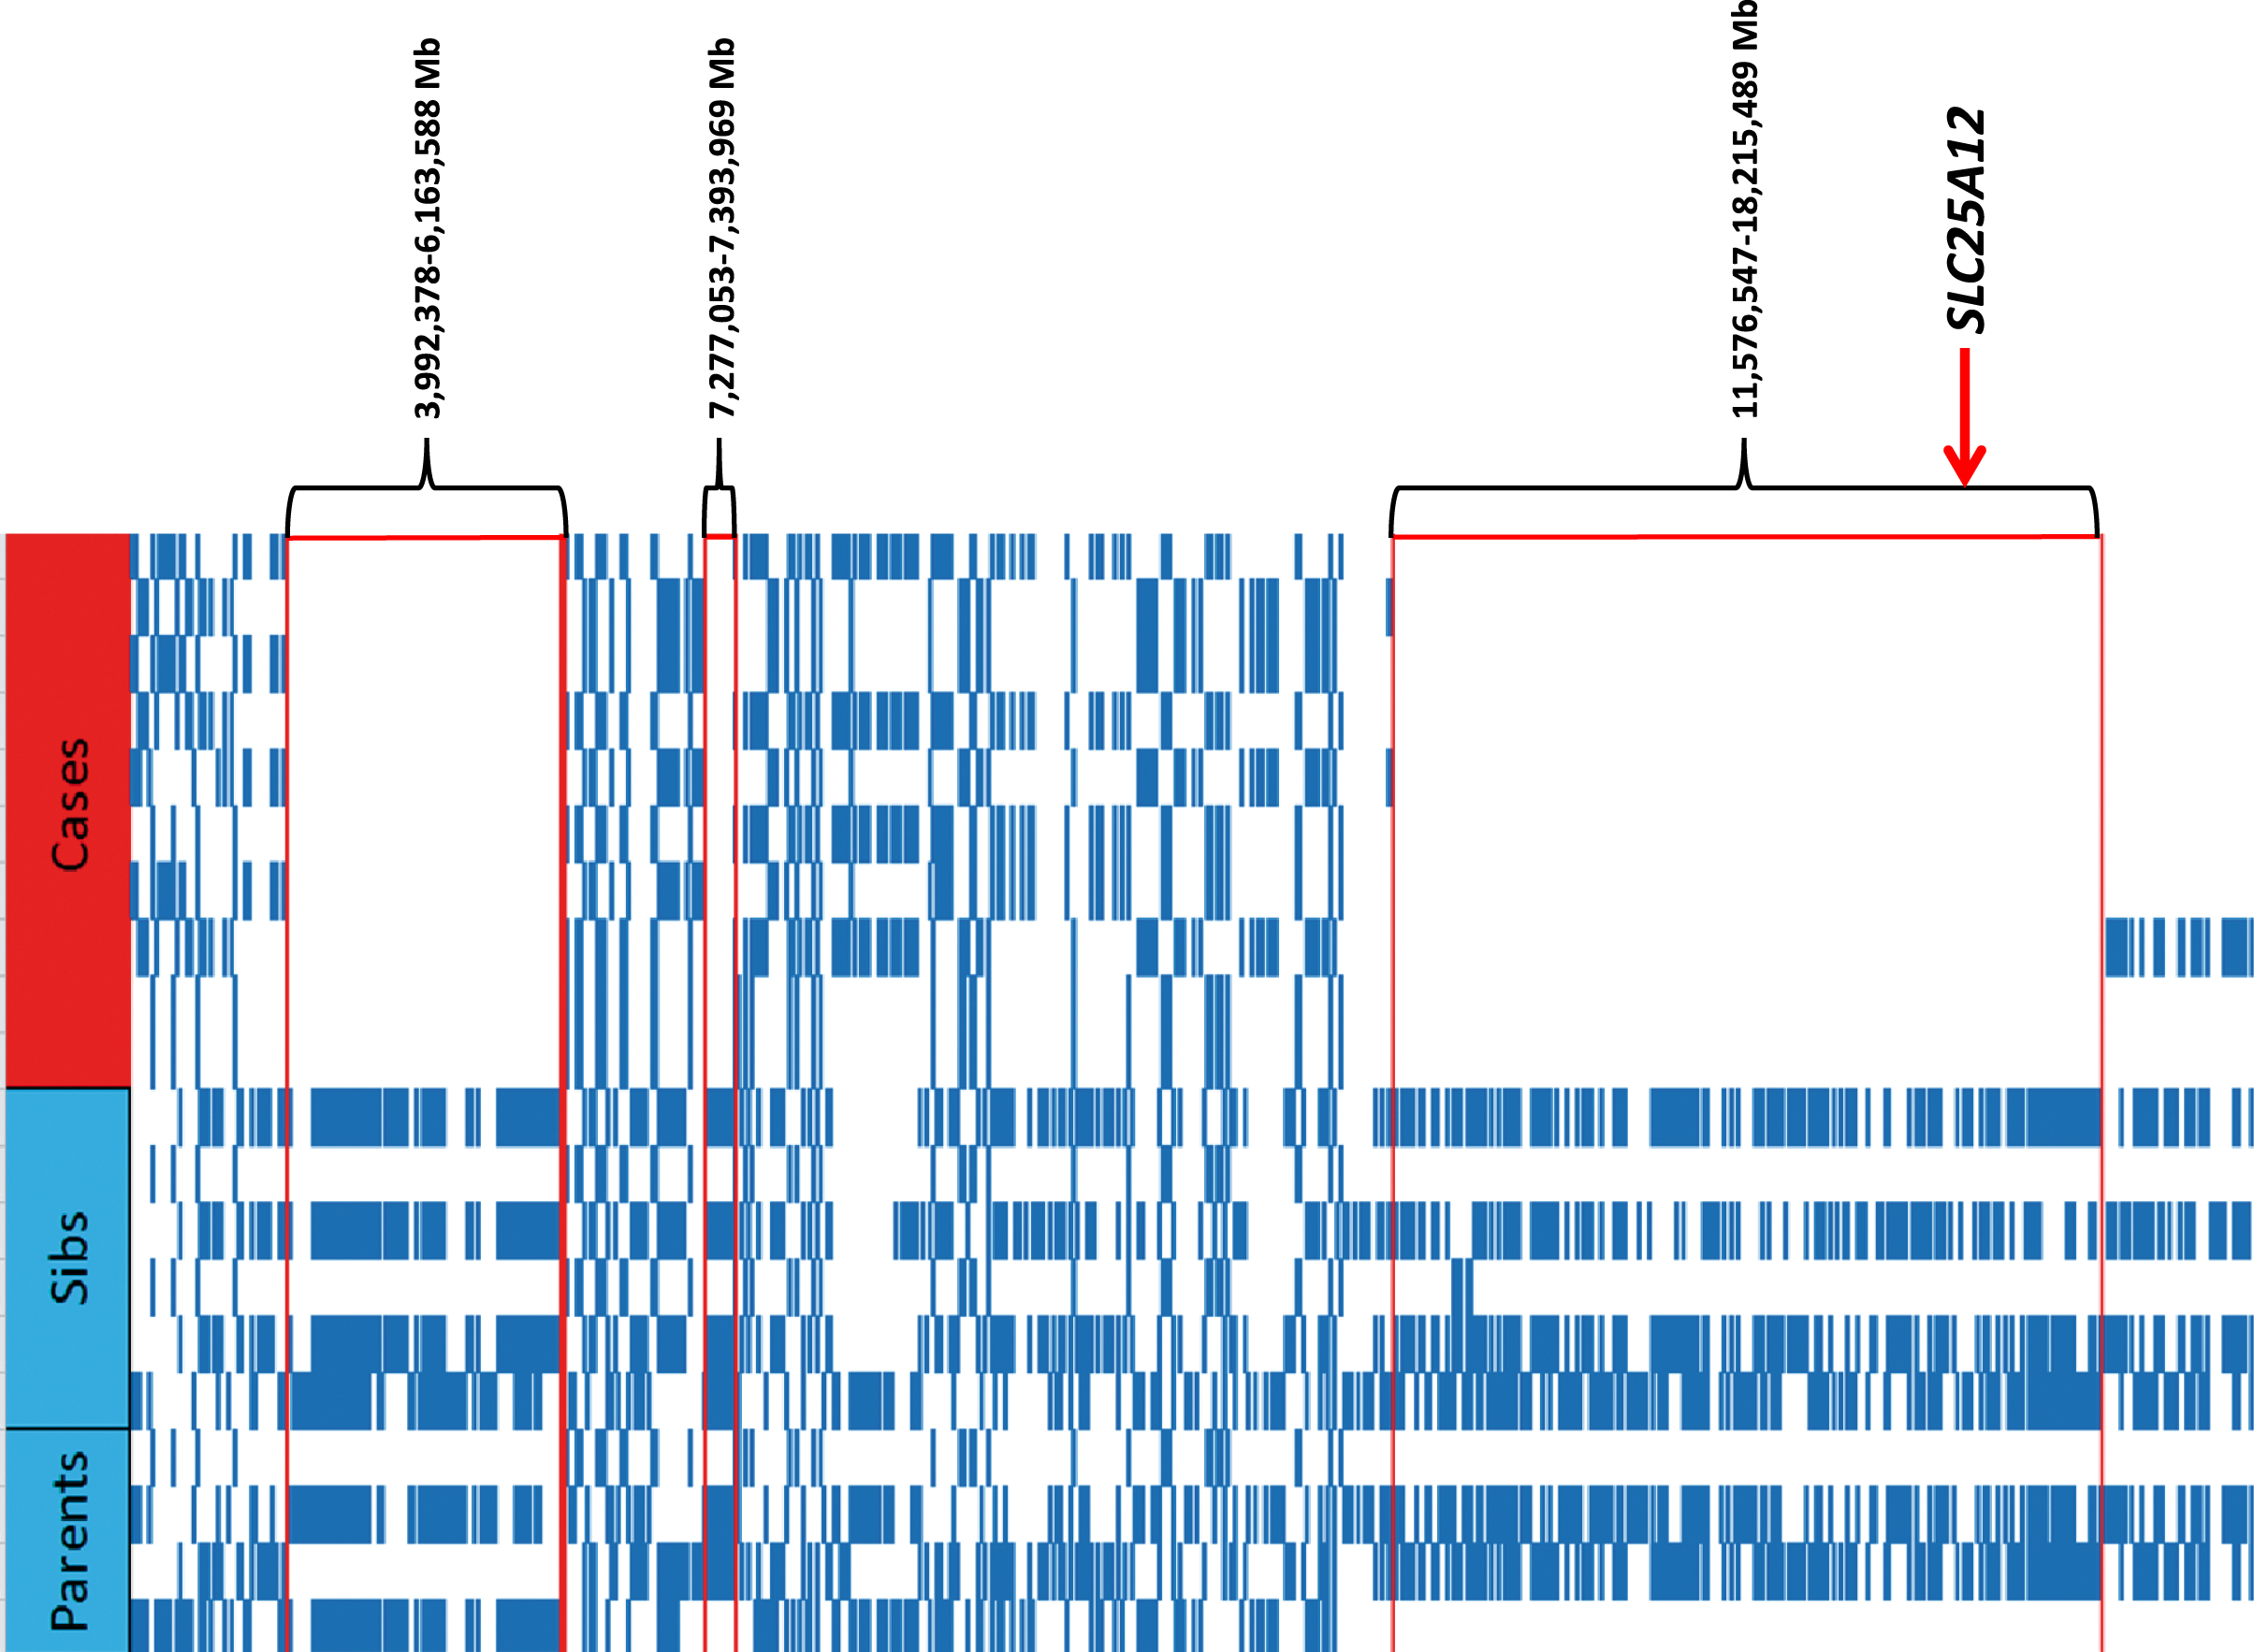 Haplotypes from the region on CFA36 identified by homozygosity mapping. Included are the 5 cases with histopathology-confirmed myopathy (red) and 5 healthy controls >2 years old. The controls consisted of 2 of parents and 3 full-sibs (blue). Both haplotypes from each individual are provided, with 3 areas of homozygosity in the cases observed as clear areas underneath the nucleotide positions.